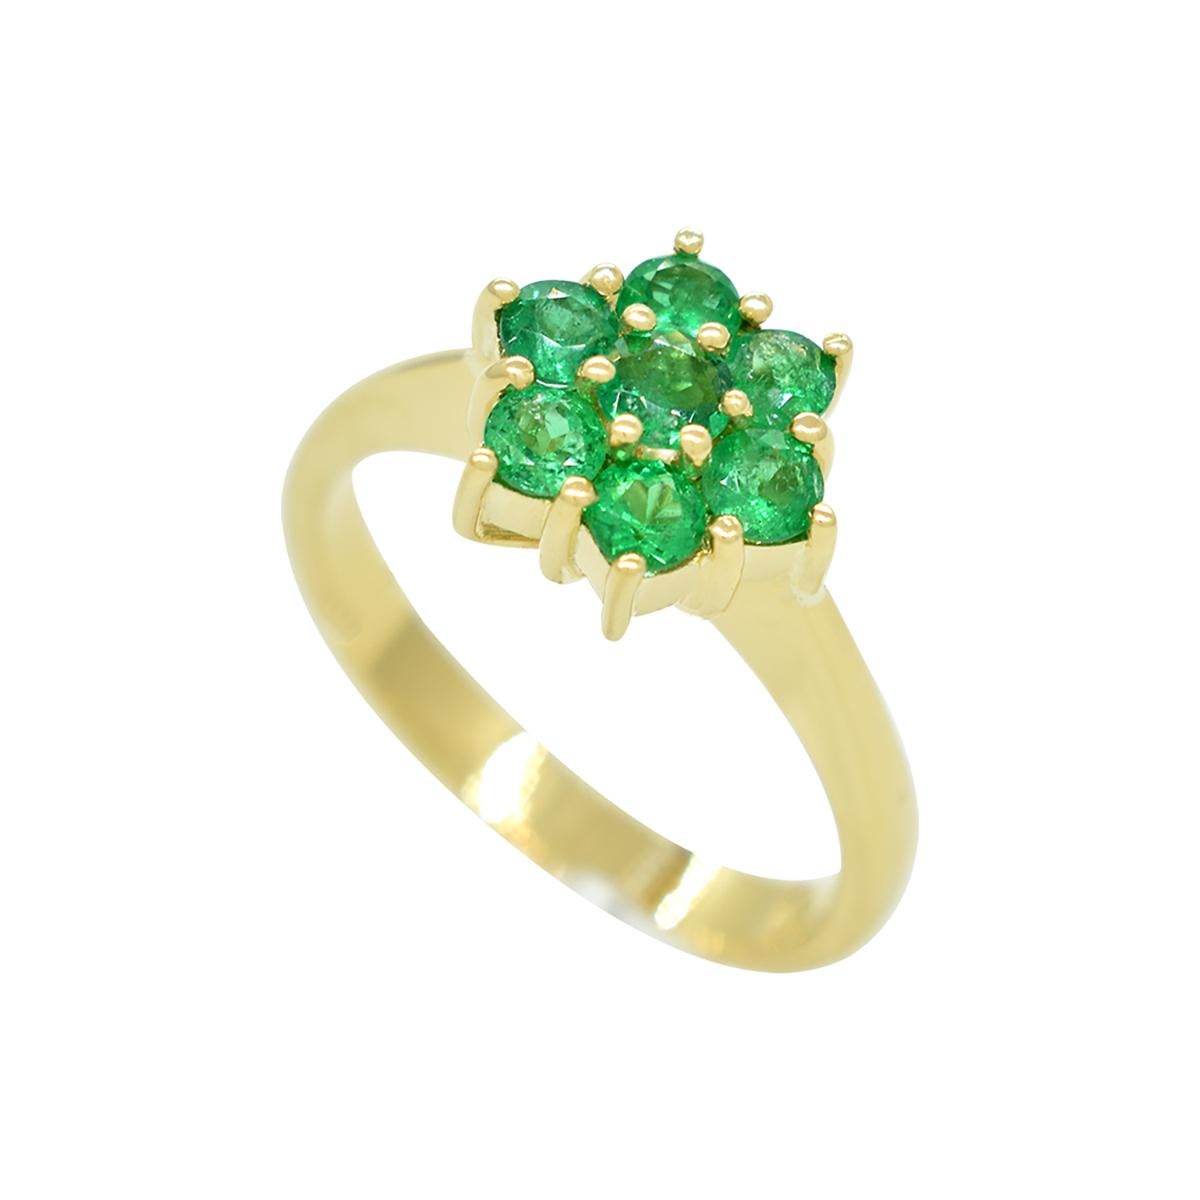 Emerald ring custom made in 18K yellow gold with a beautiful selection of 7 round cut natural emeralds from Colombia in 0.65 carats total weight, in a stunning cluster ring design. All the gemstones share a gorgeous “grass green” color full of life